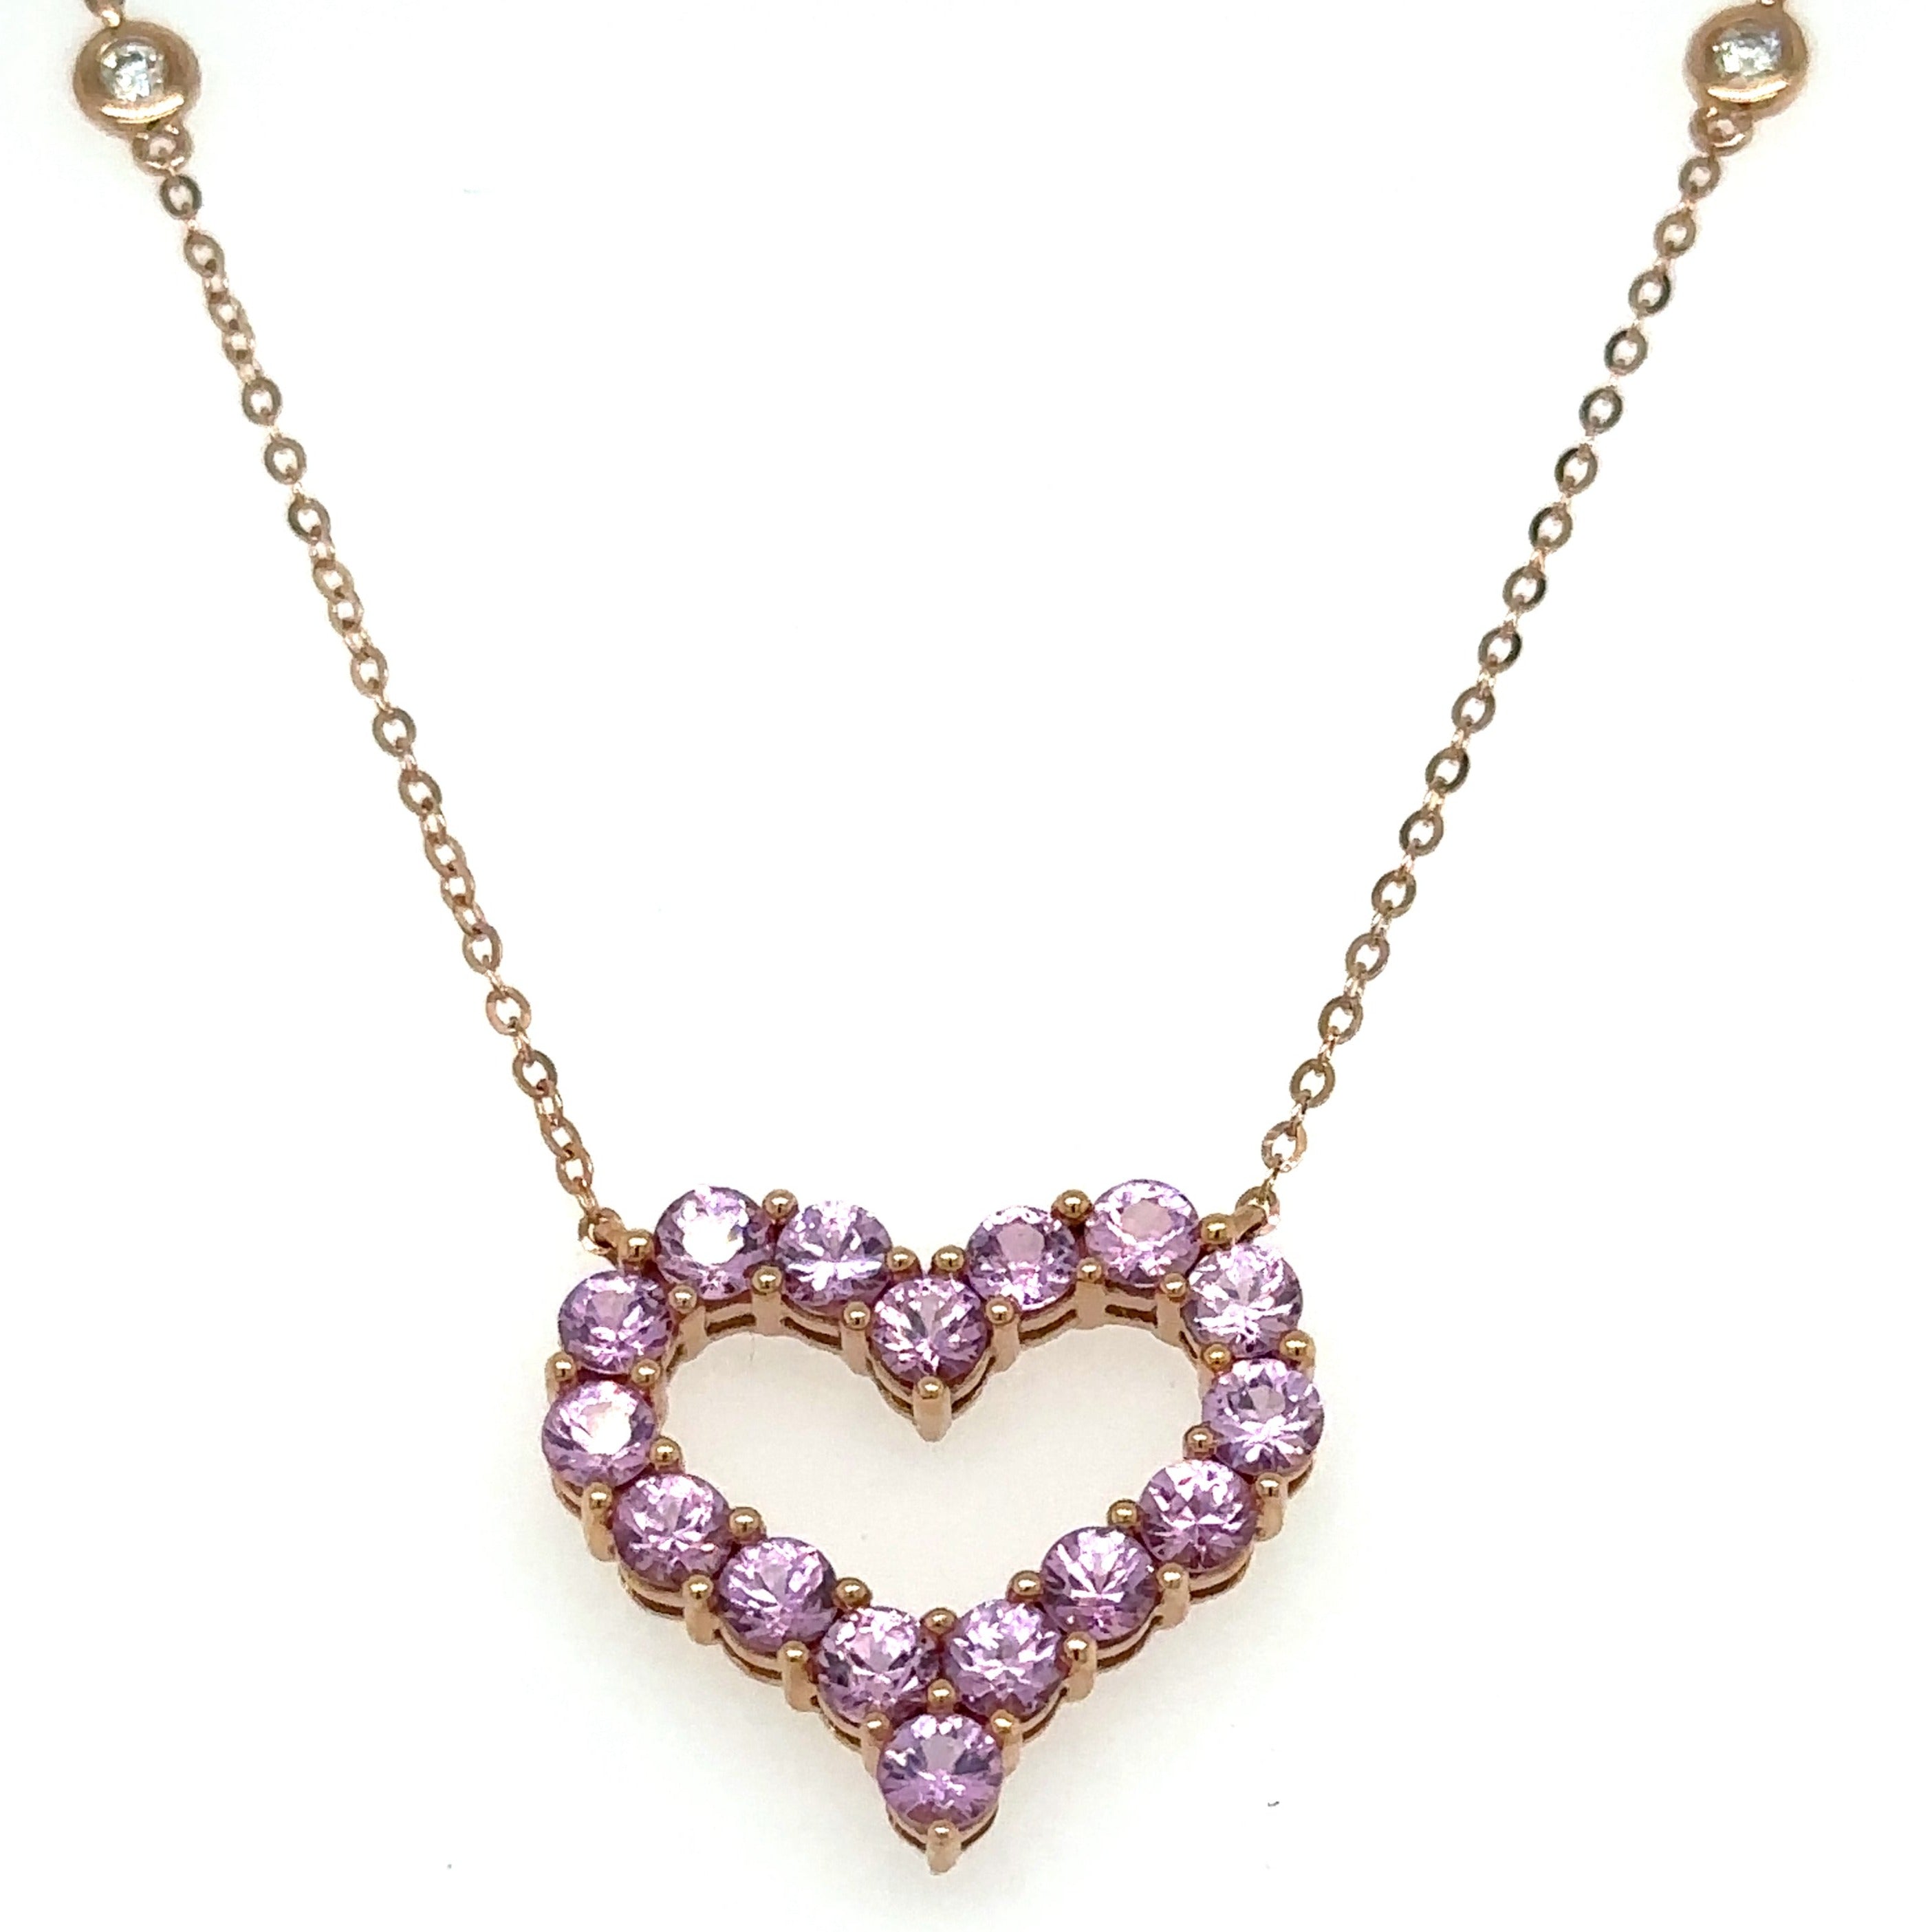 2.24carat Pink Sapphire Open Heart Shaped Necklace